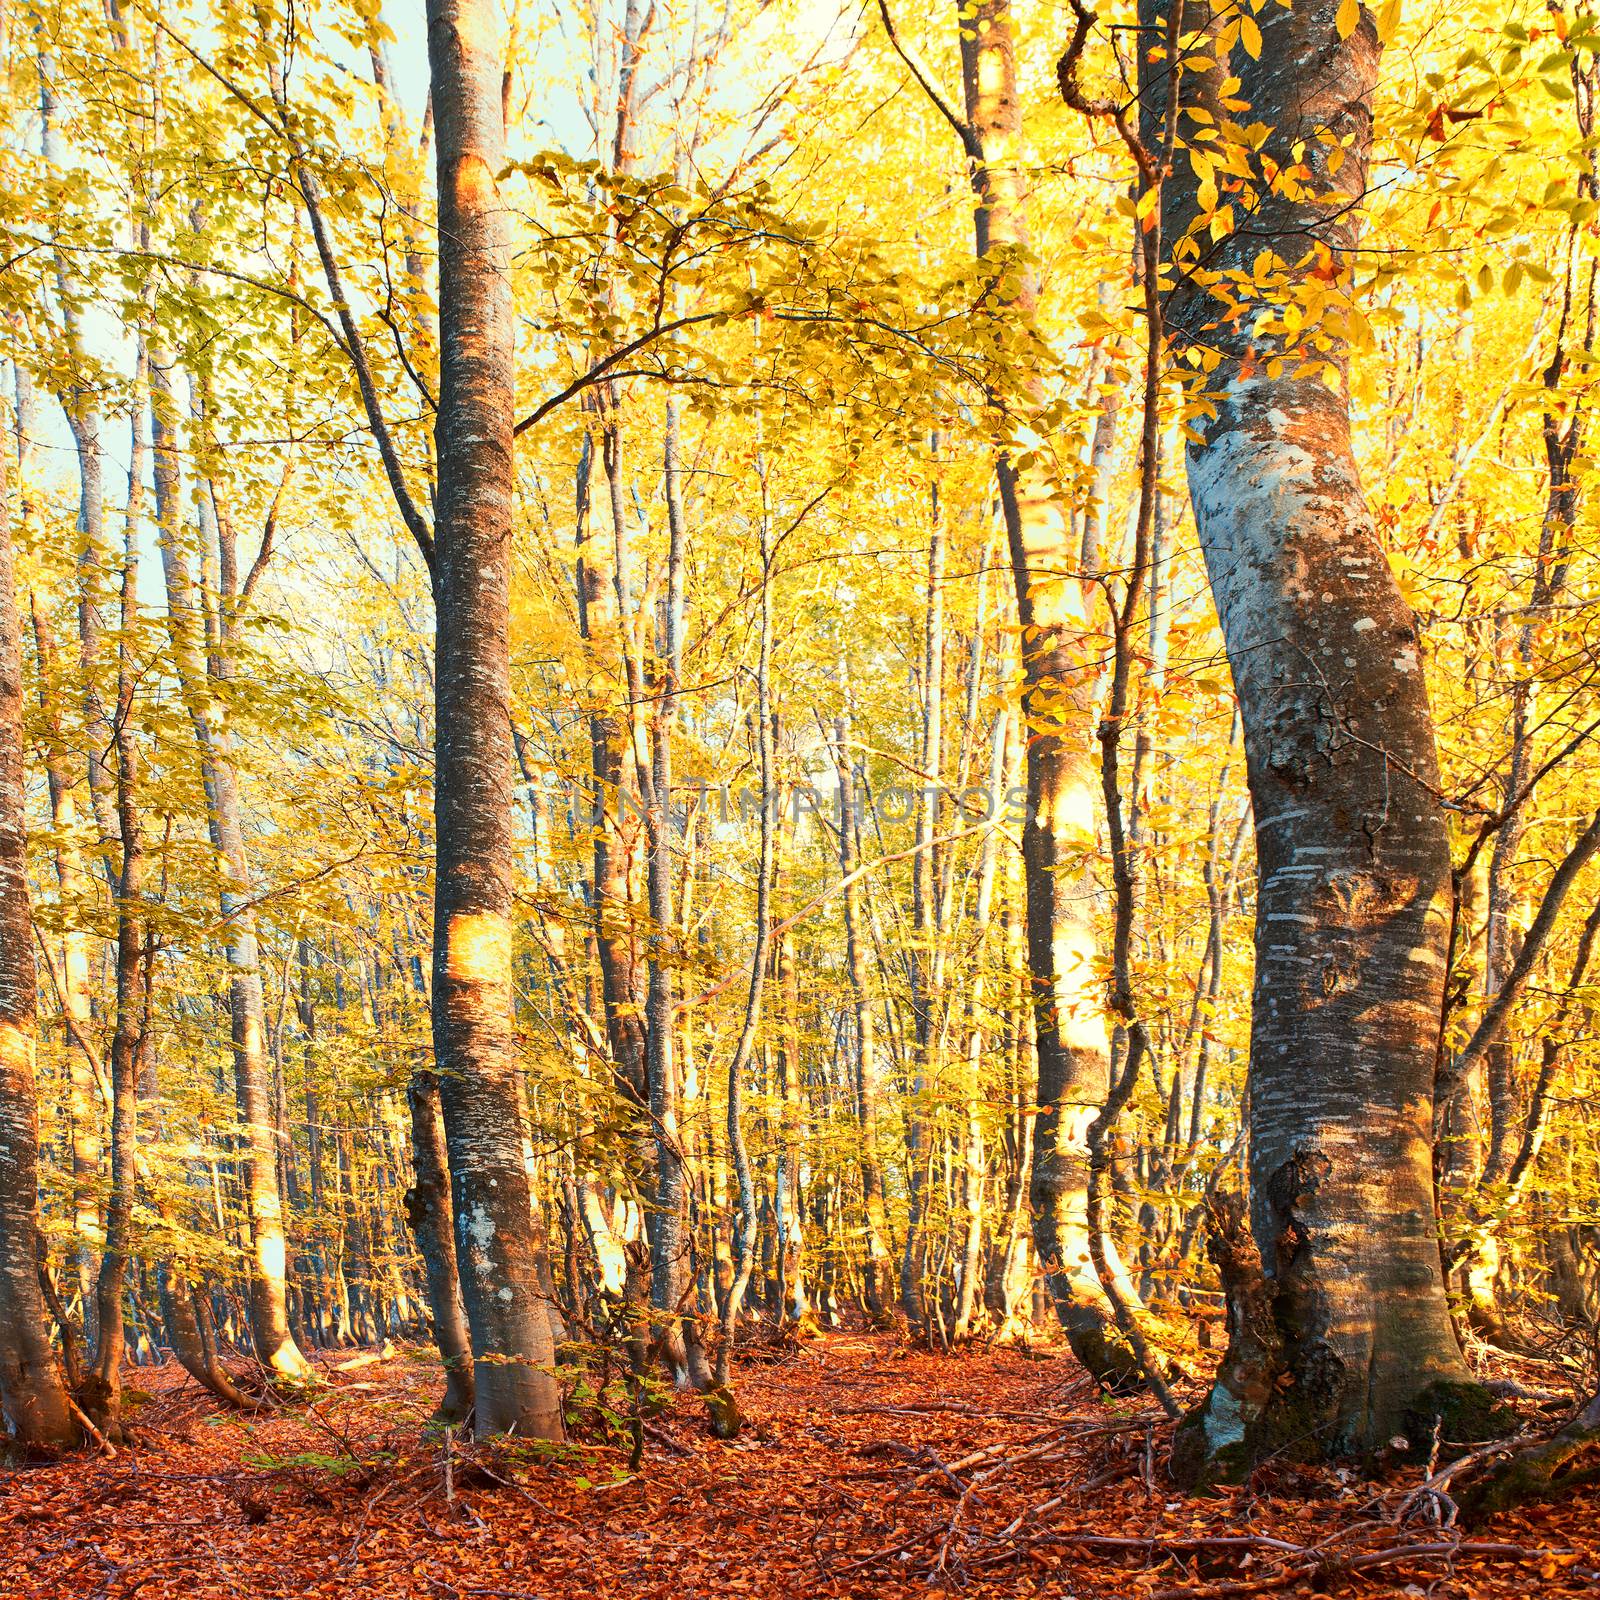 Autumn forest. Trees with green and yellow leaves